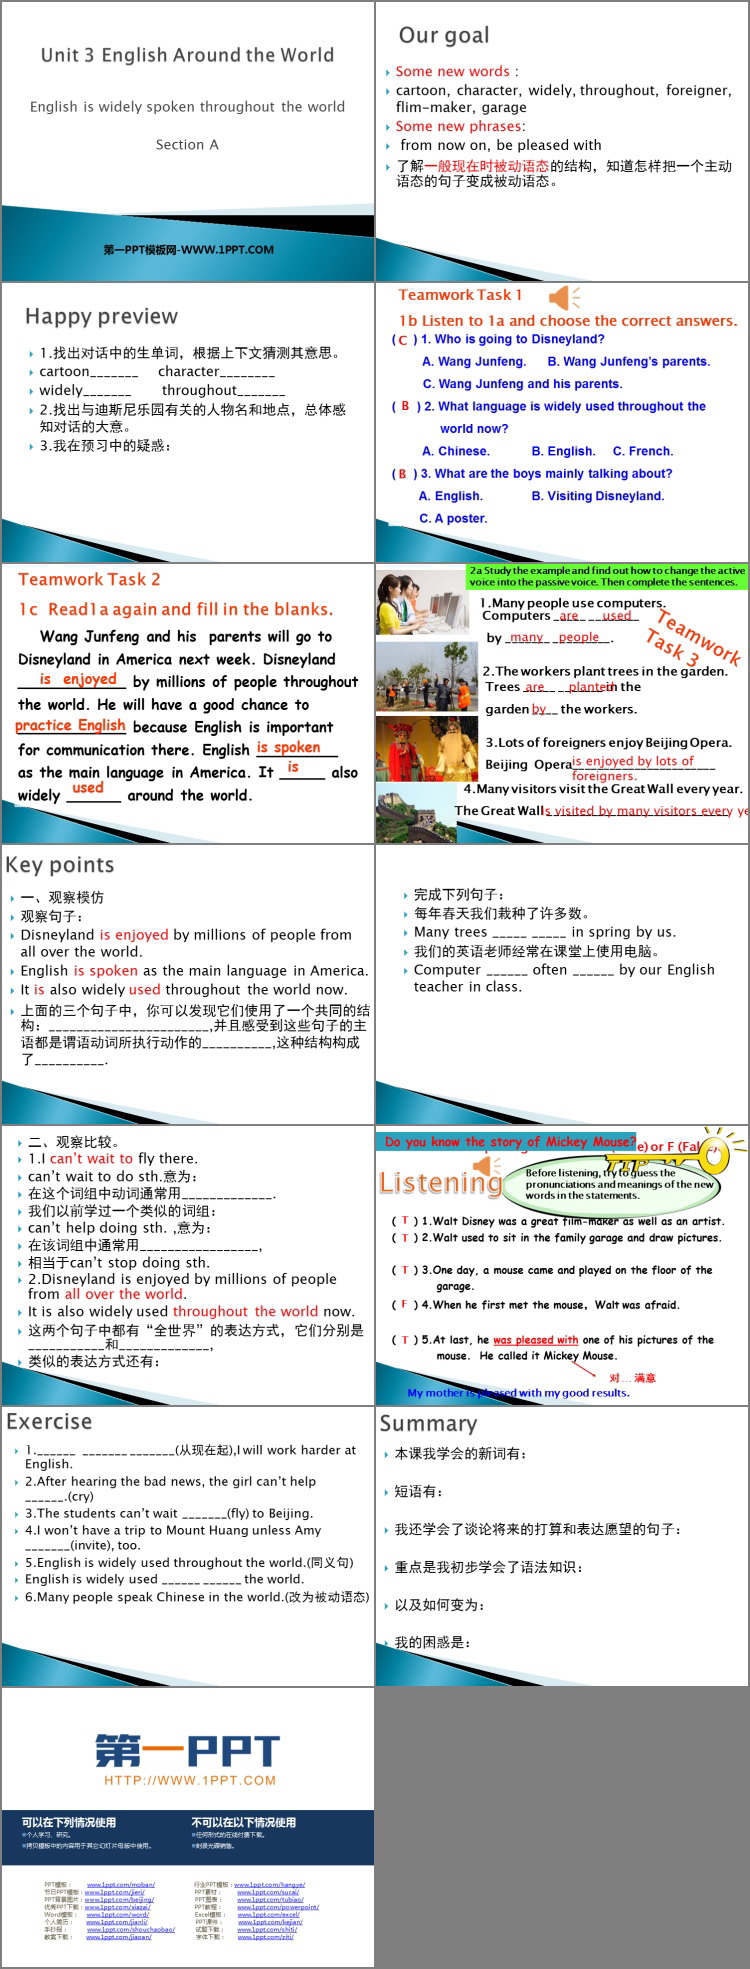 《English is widely spoken throughout the world》SectionA MP3音频课件-预览图02